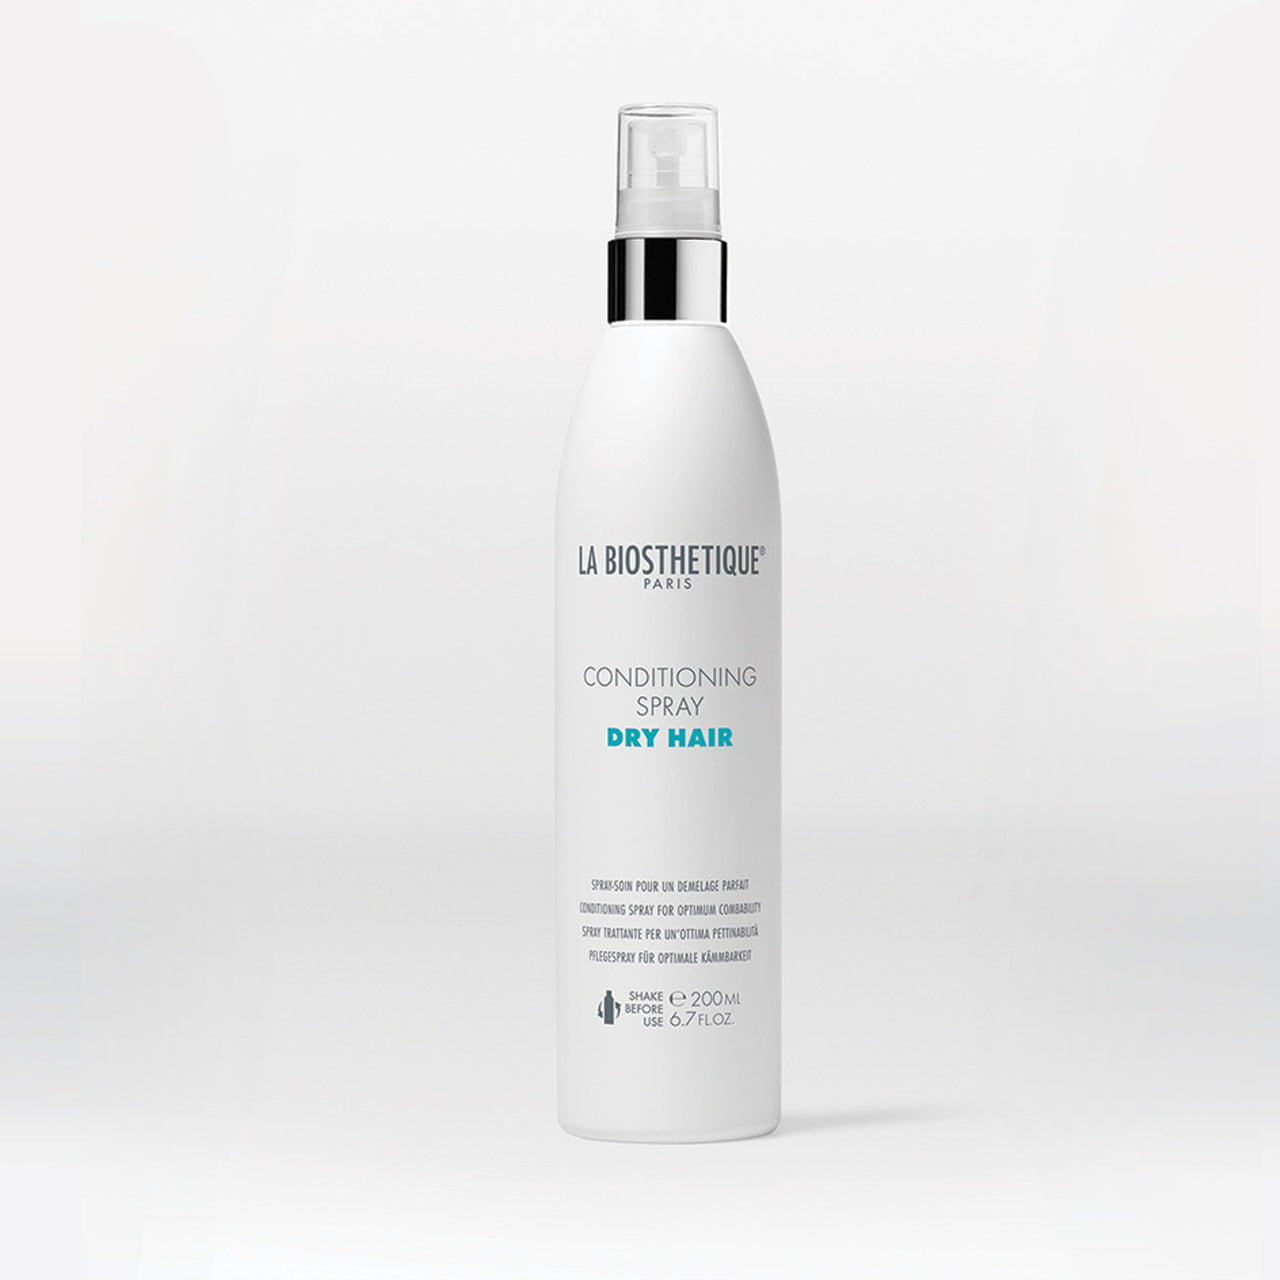 LA BIOSTHÉTIQUE Dry Hair Conditioning Spray by Renee Yates hairdresser and extension specialist Perth